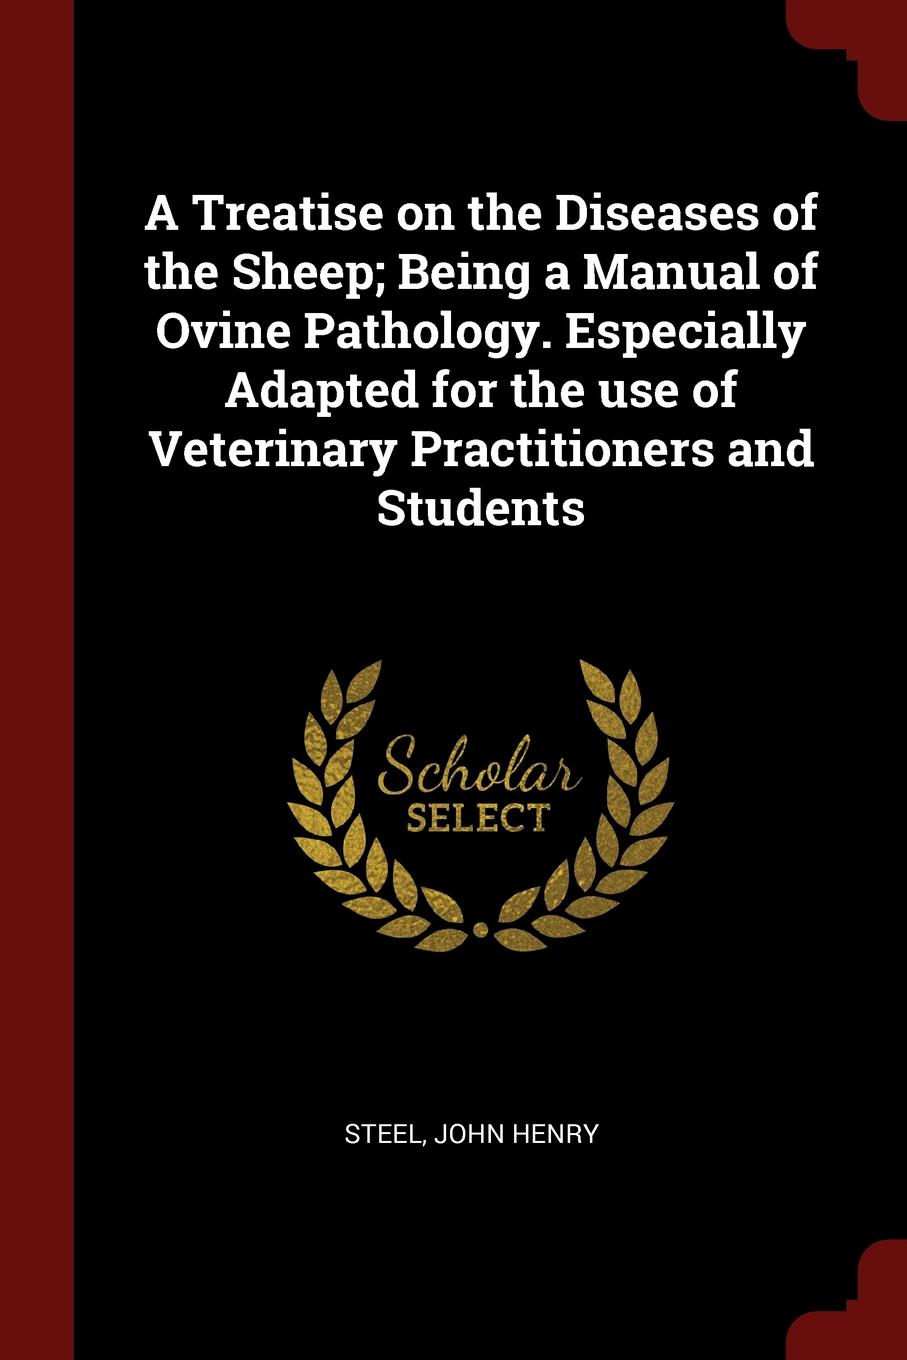 A Treatise on the Diseases of the Sheep; Being a Manual of Ovine Pathology. Especially Adapted for the use of Veterinary Practitioners and Students